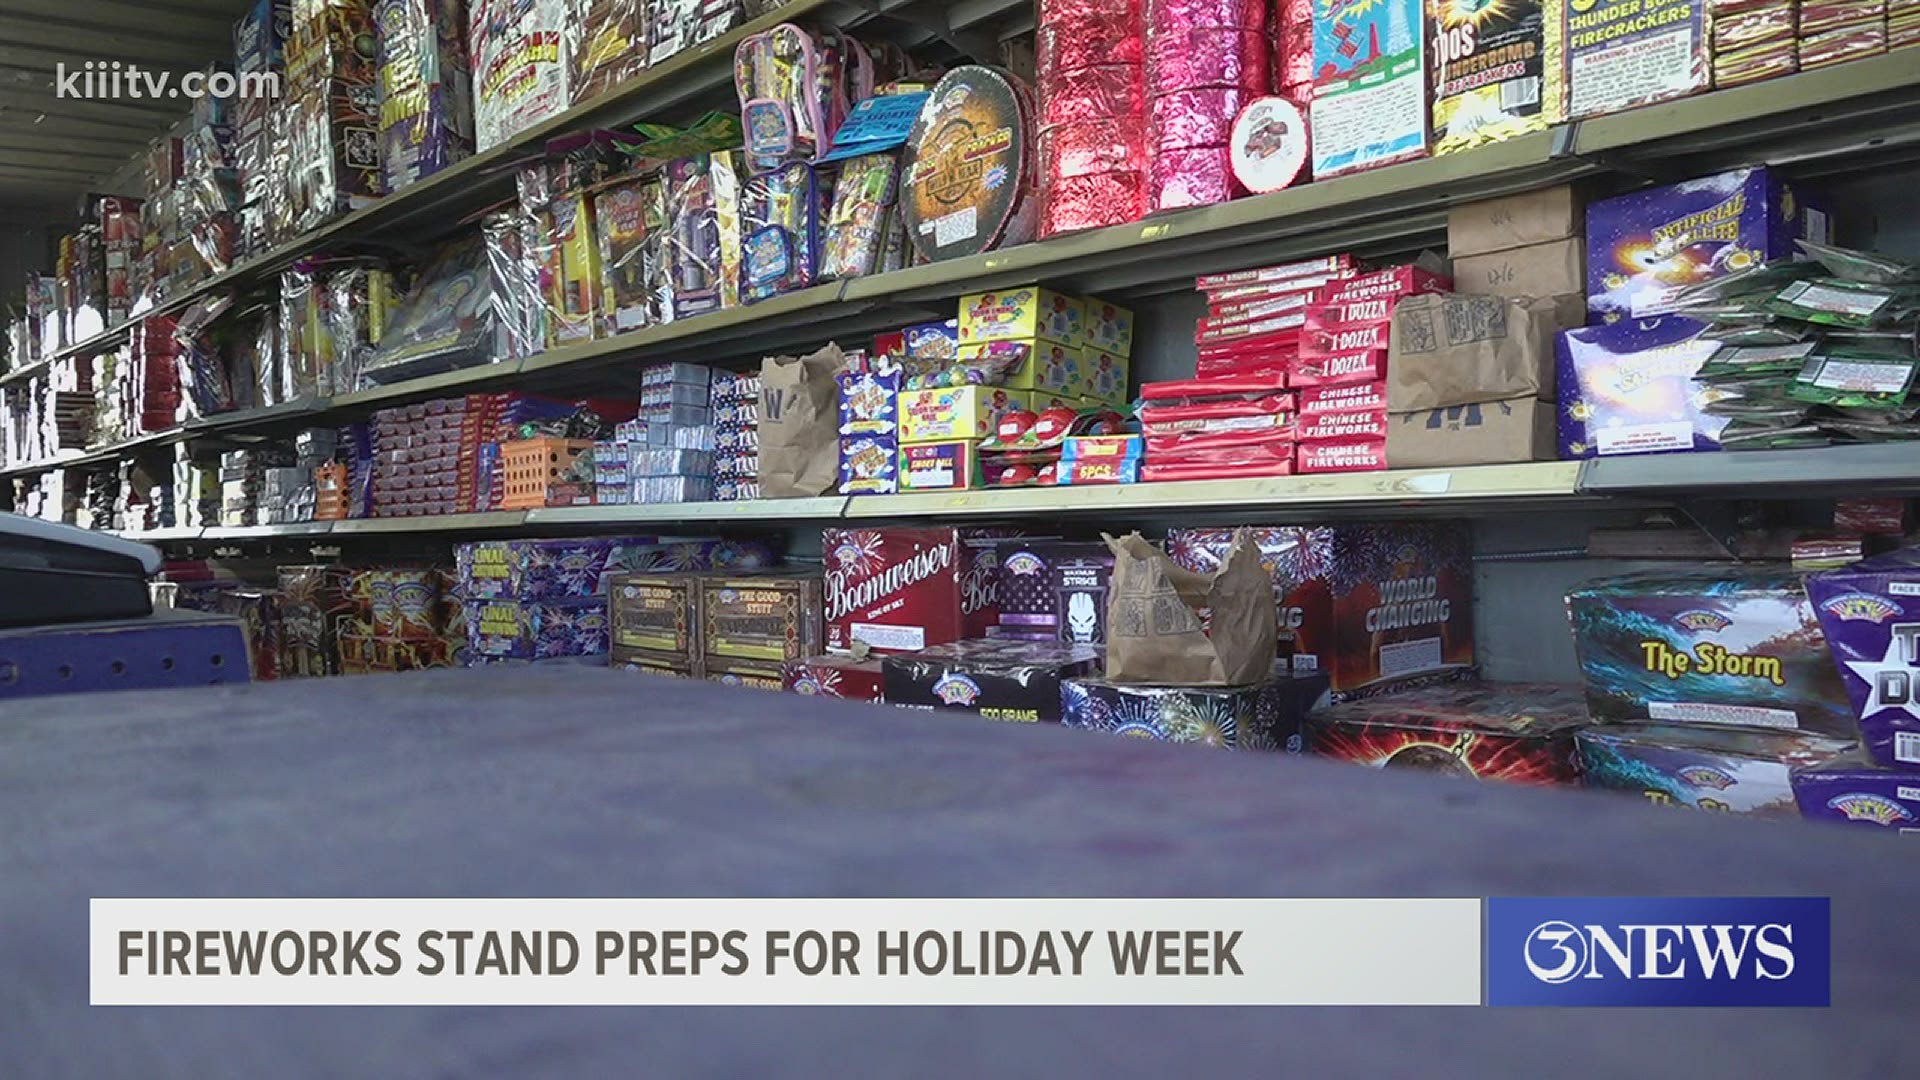 Miguel Trejo and his family have been selling fireworks for 11 years.